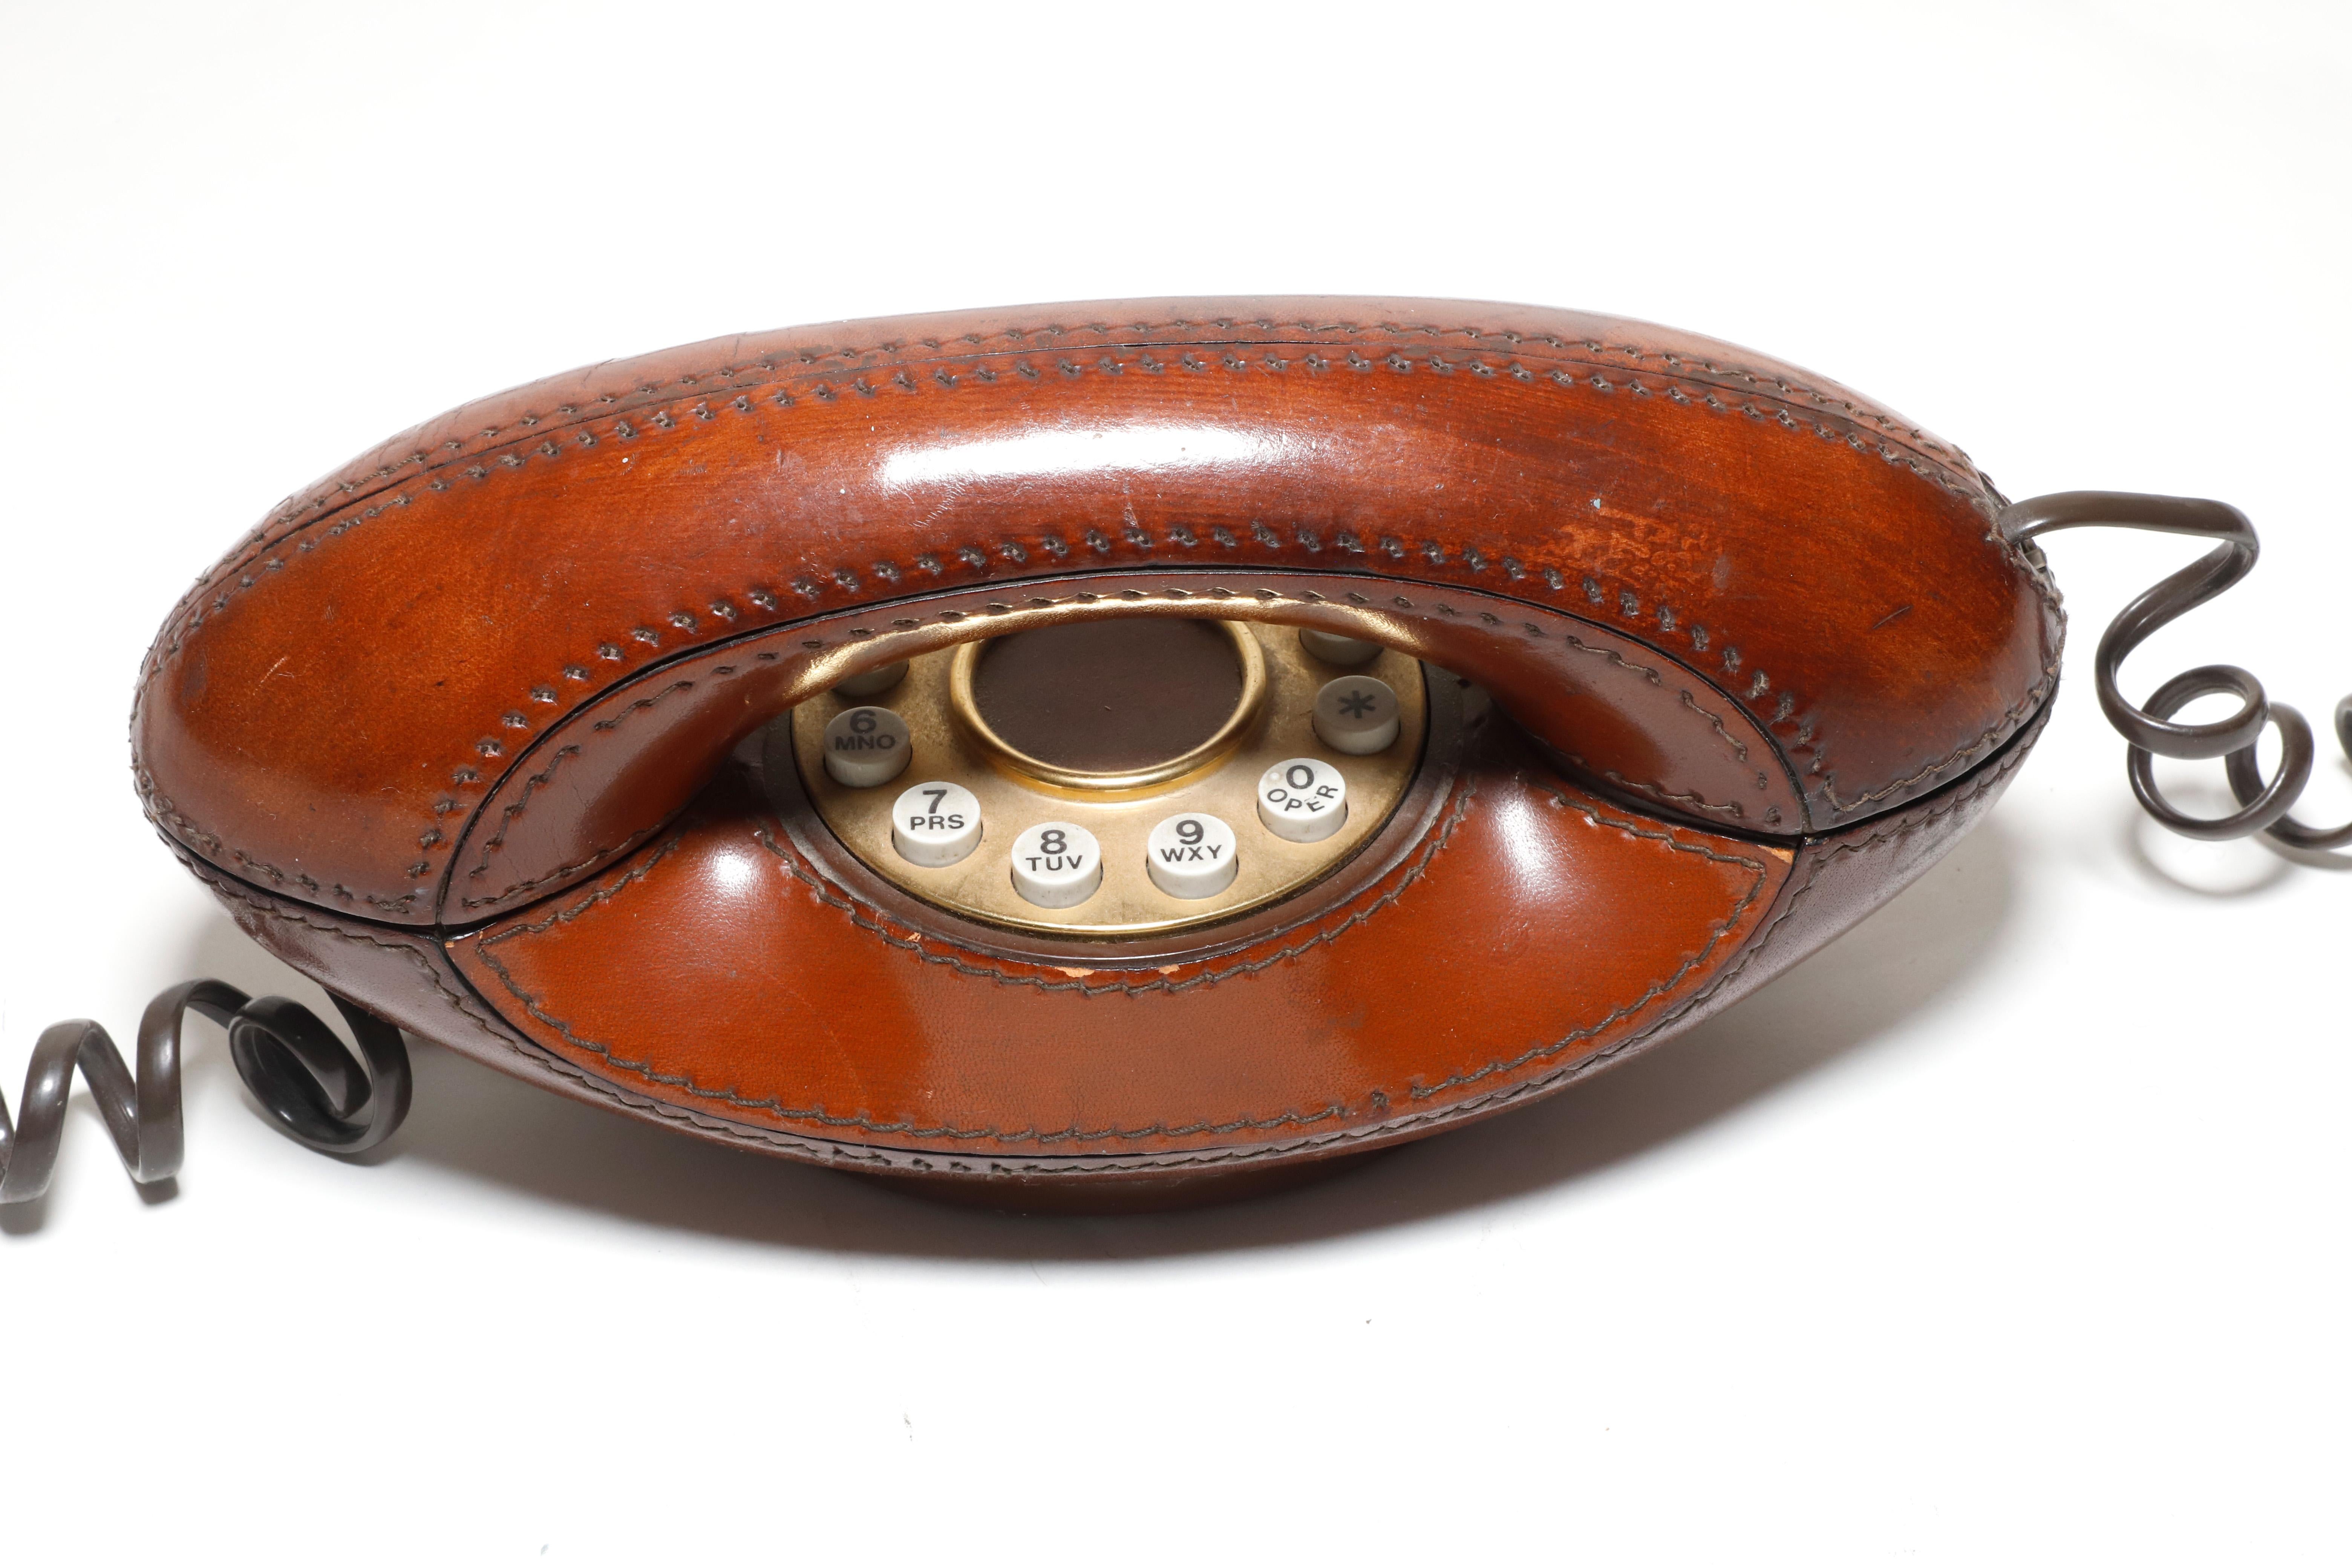 Post-Modern Vintage Genie 1970s Retro Brown Leather Push Butoon Telephone For Sale